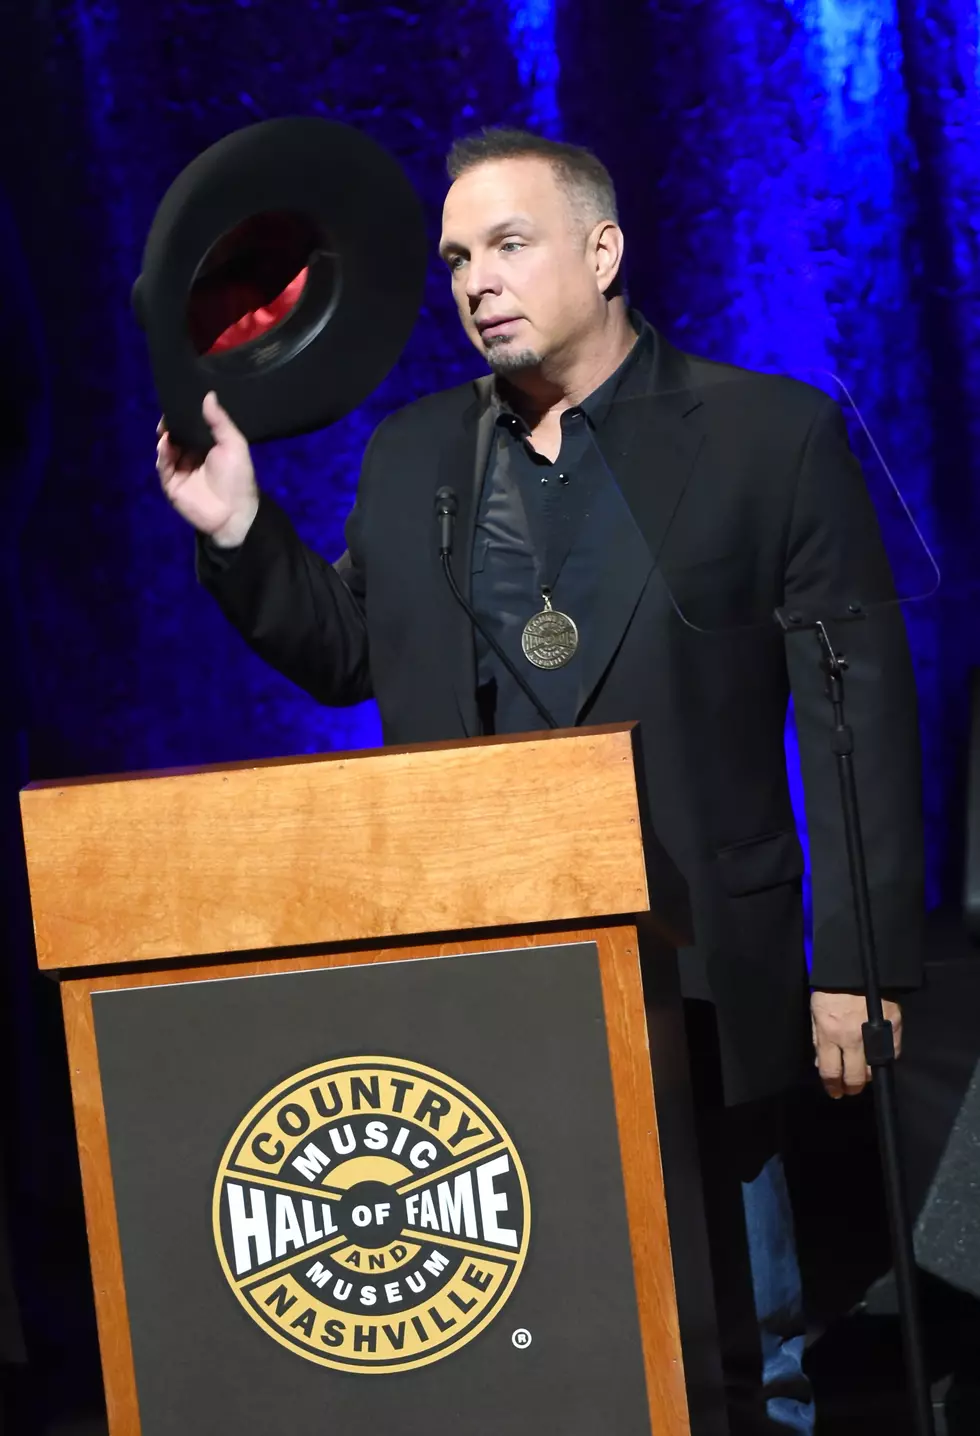 Garth Brooks Takes the ‘Mannequin Challenge’ Live in Concert [WATCH]